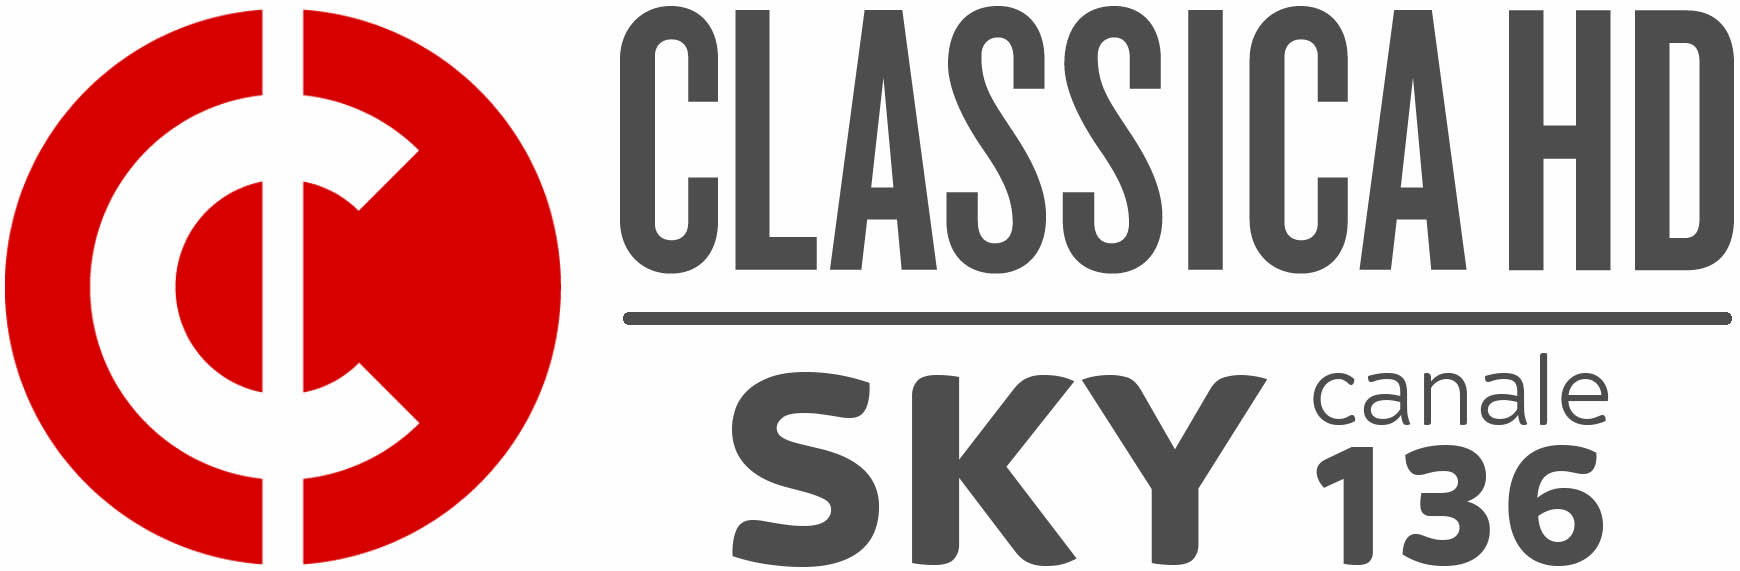 ClassicaHD   SKY canale 136 orizzontale